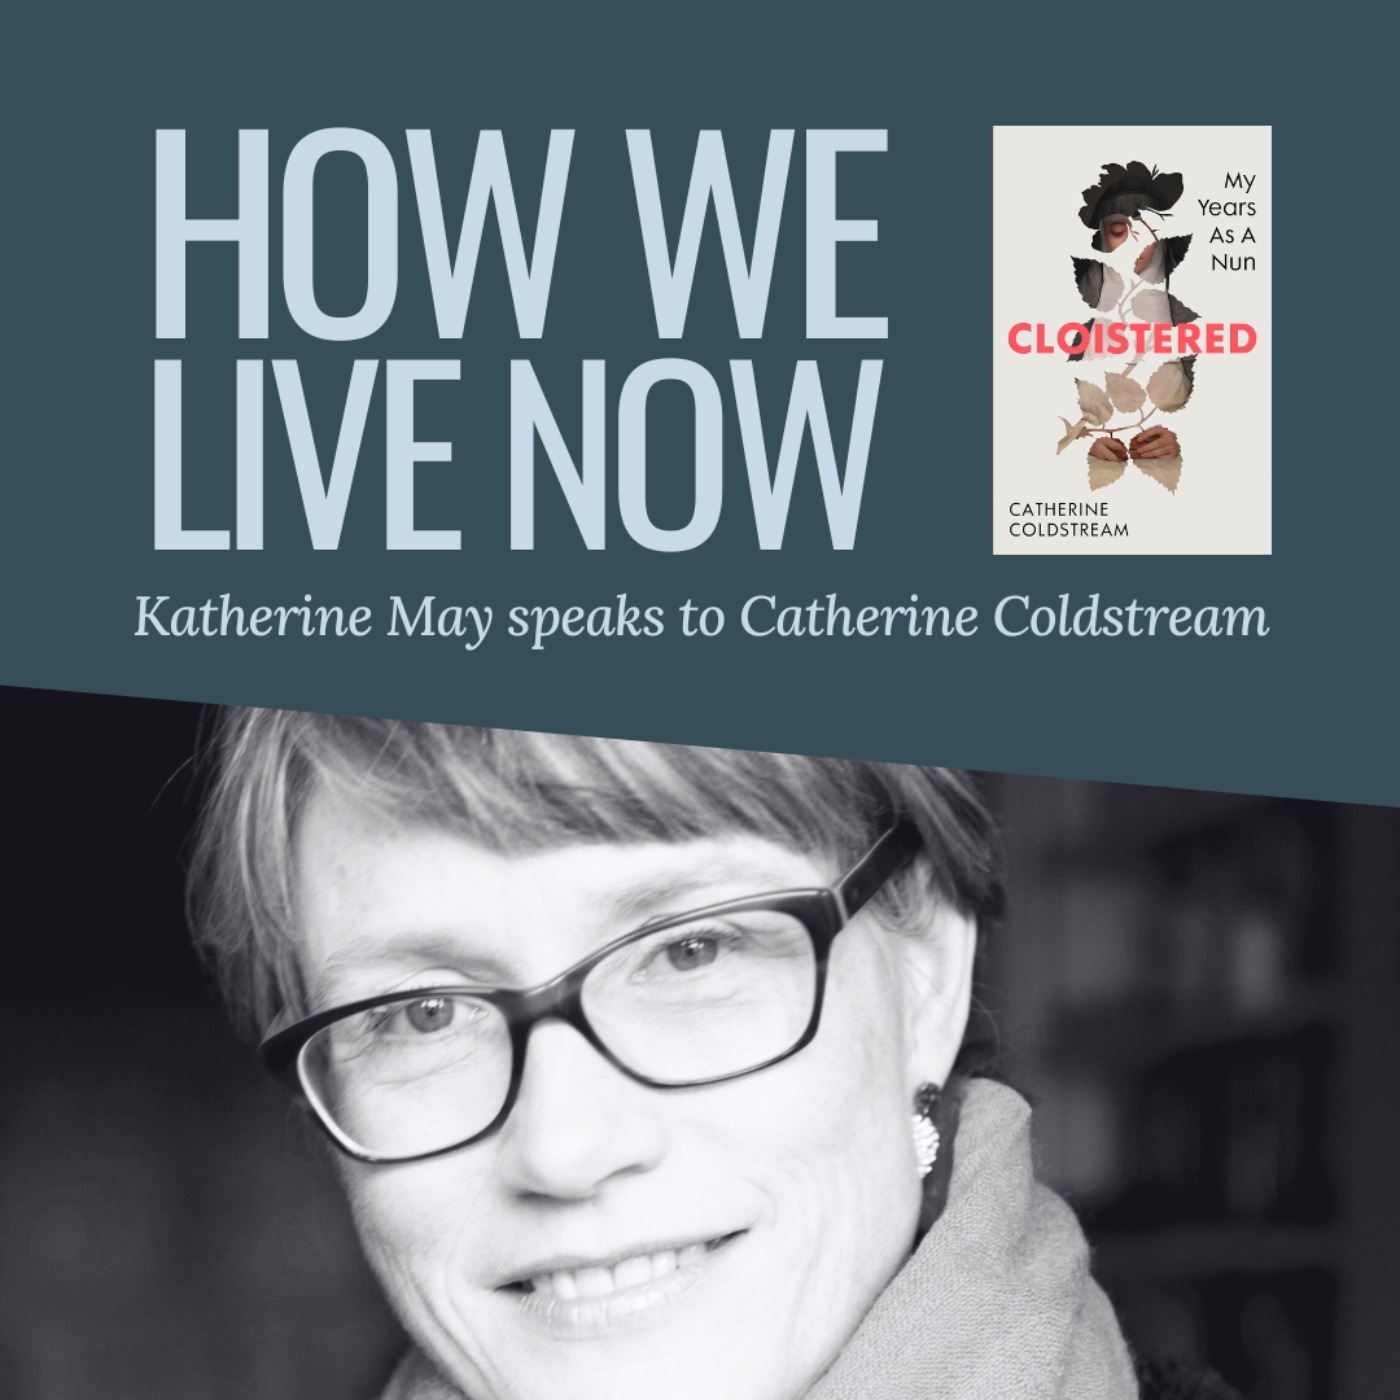 cover art for Catherine Coldstream on life as a nun